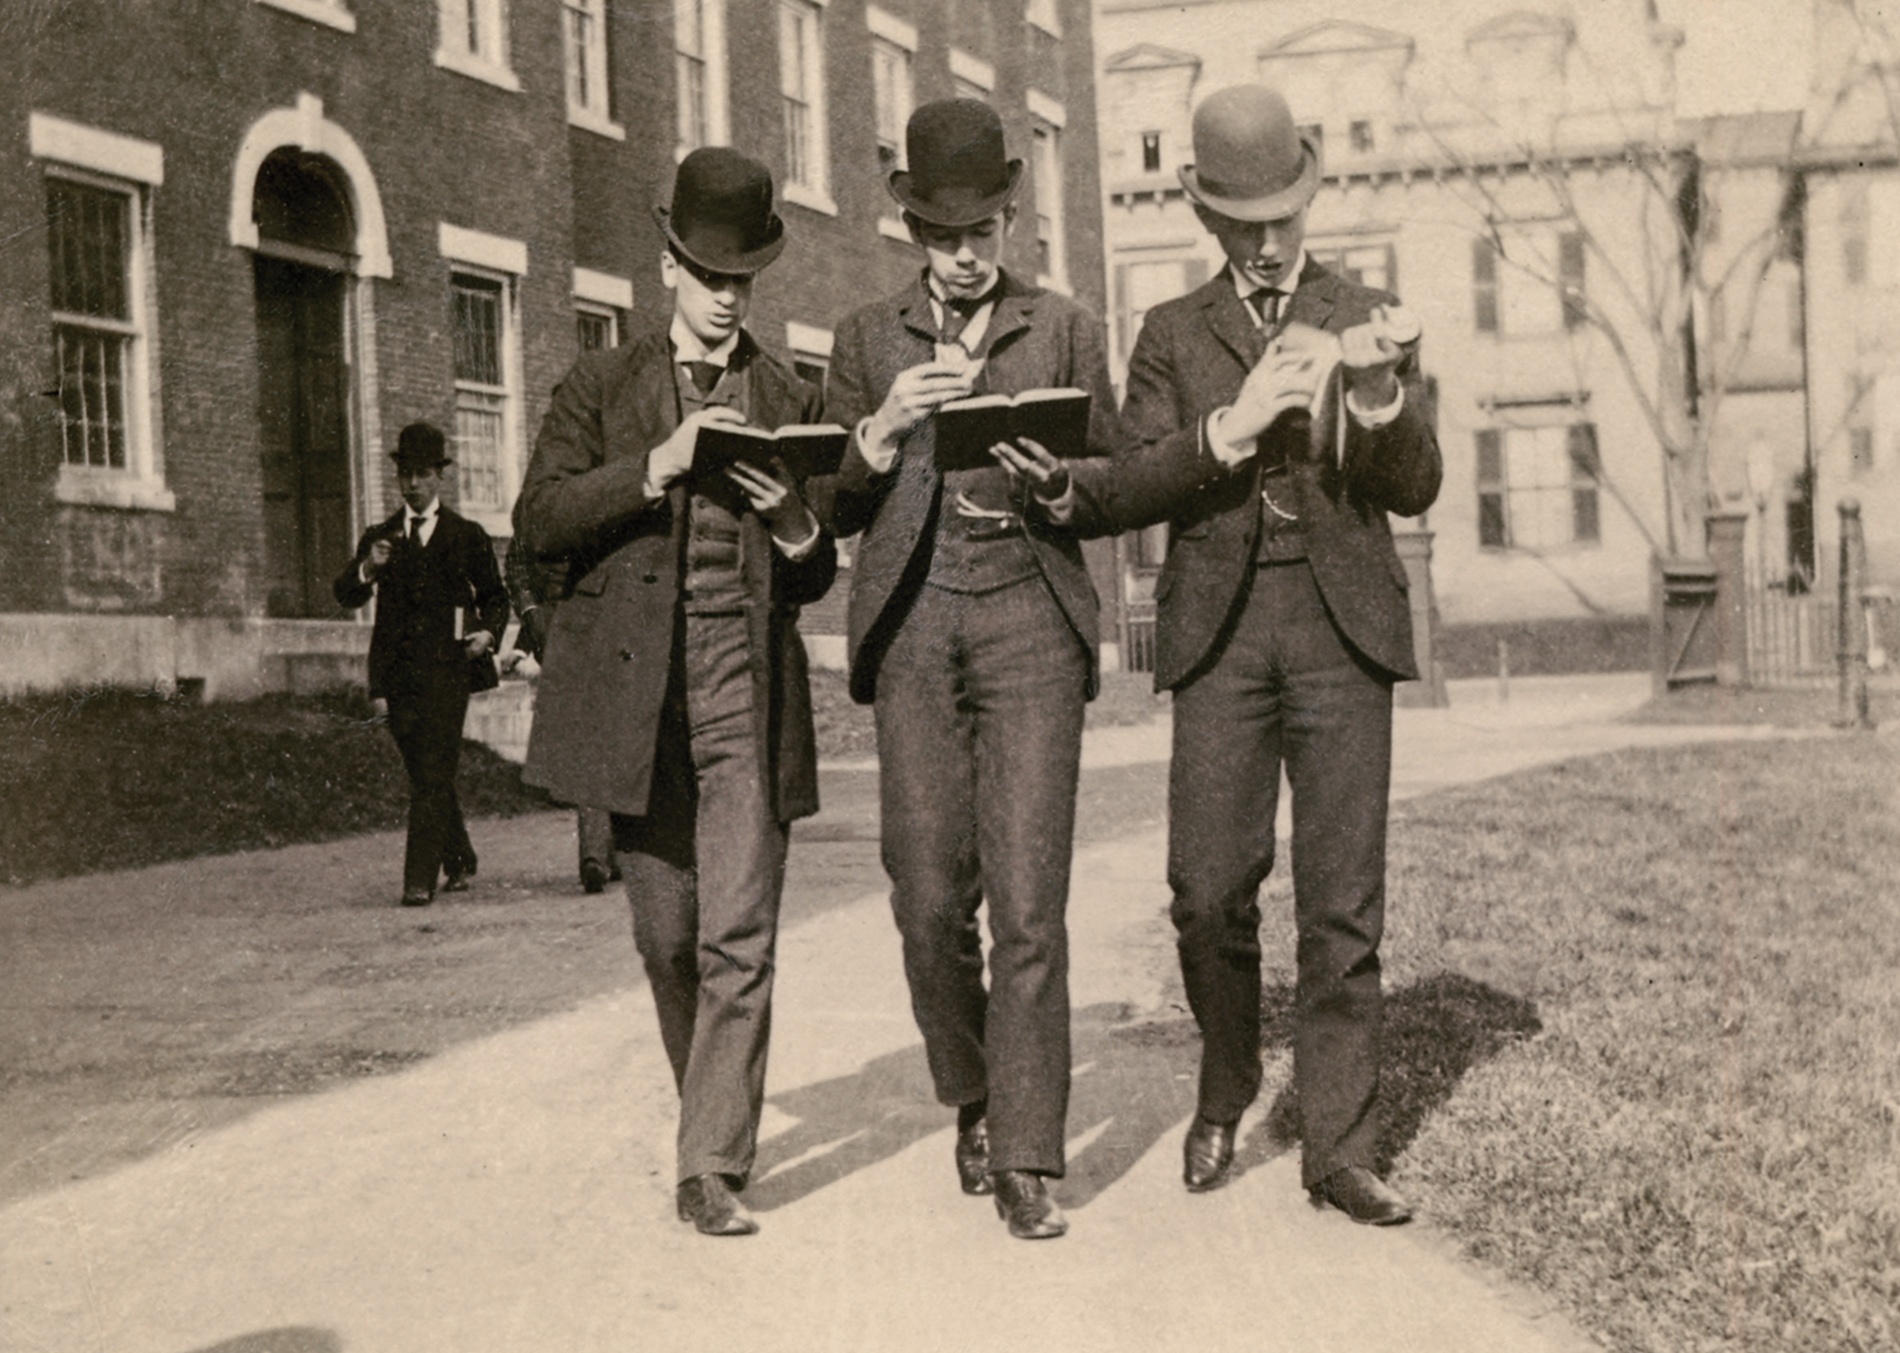 Image of three men from Brown class of 1888